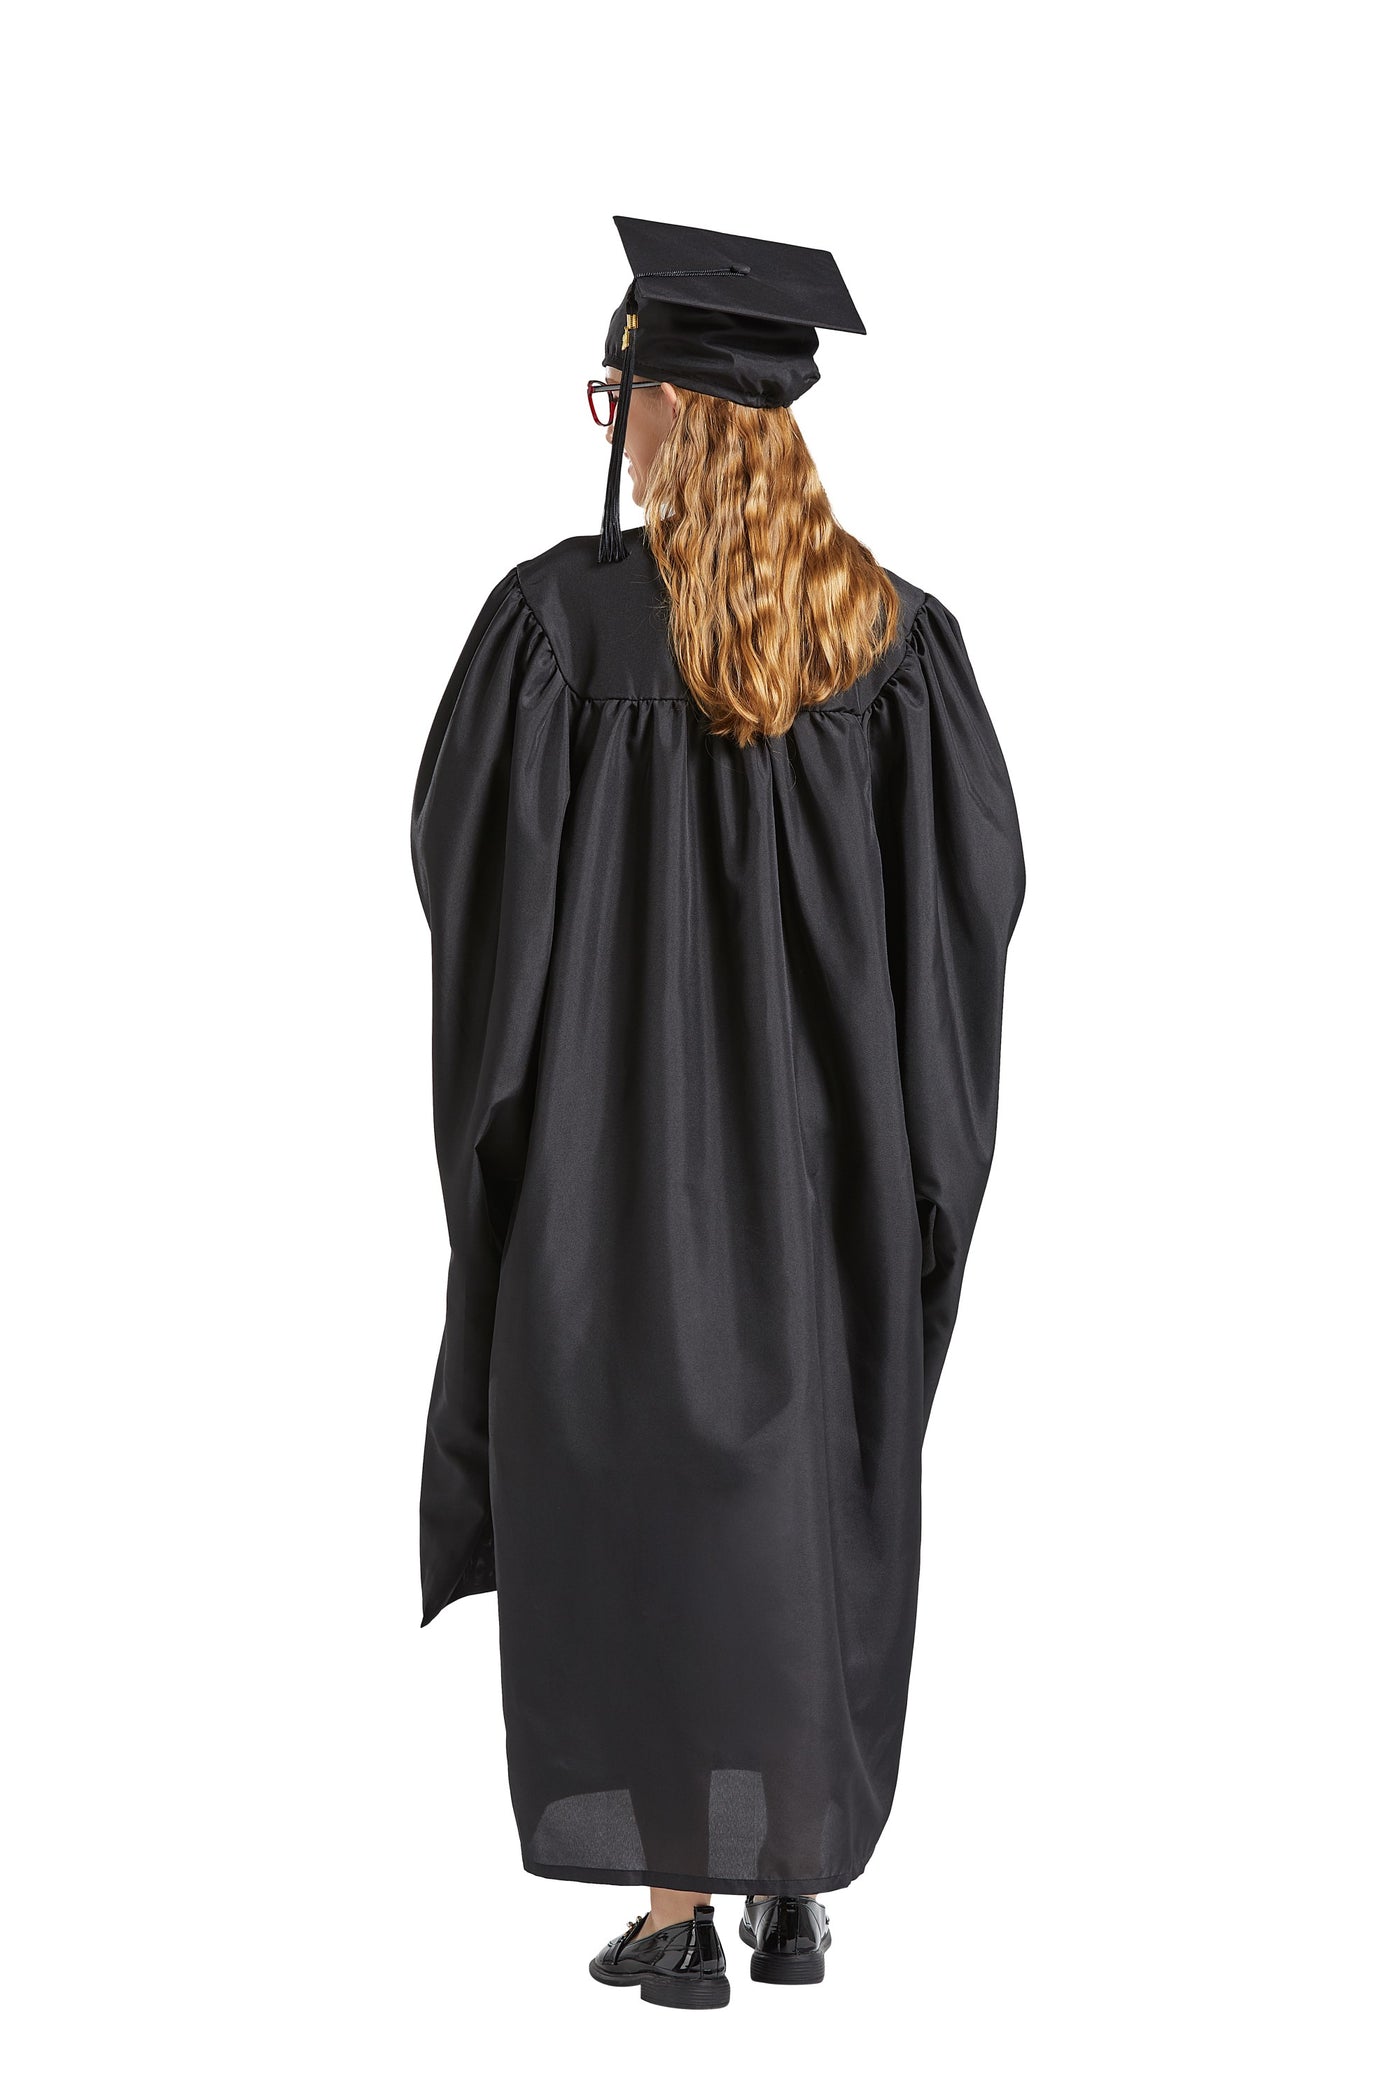 Buy FancyDressWale Polyester Blend Convocation Gown Graduation Dress  (Black|3-5 Years) Online at Low Prices in India - Amazon.in